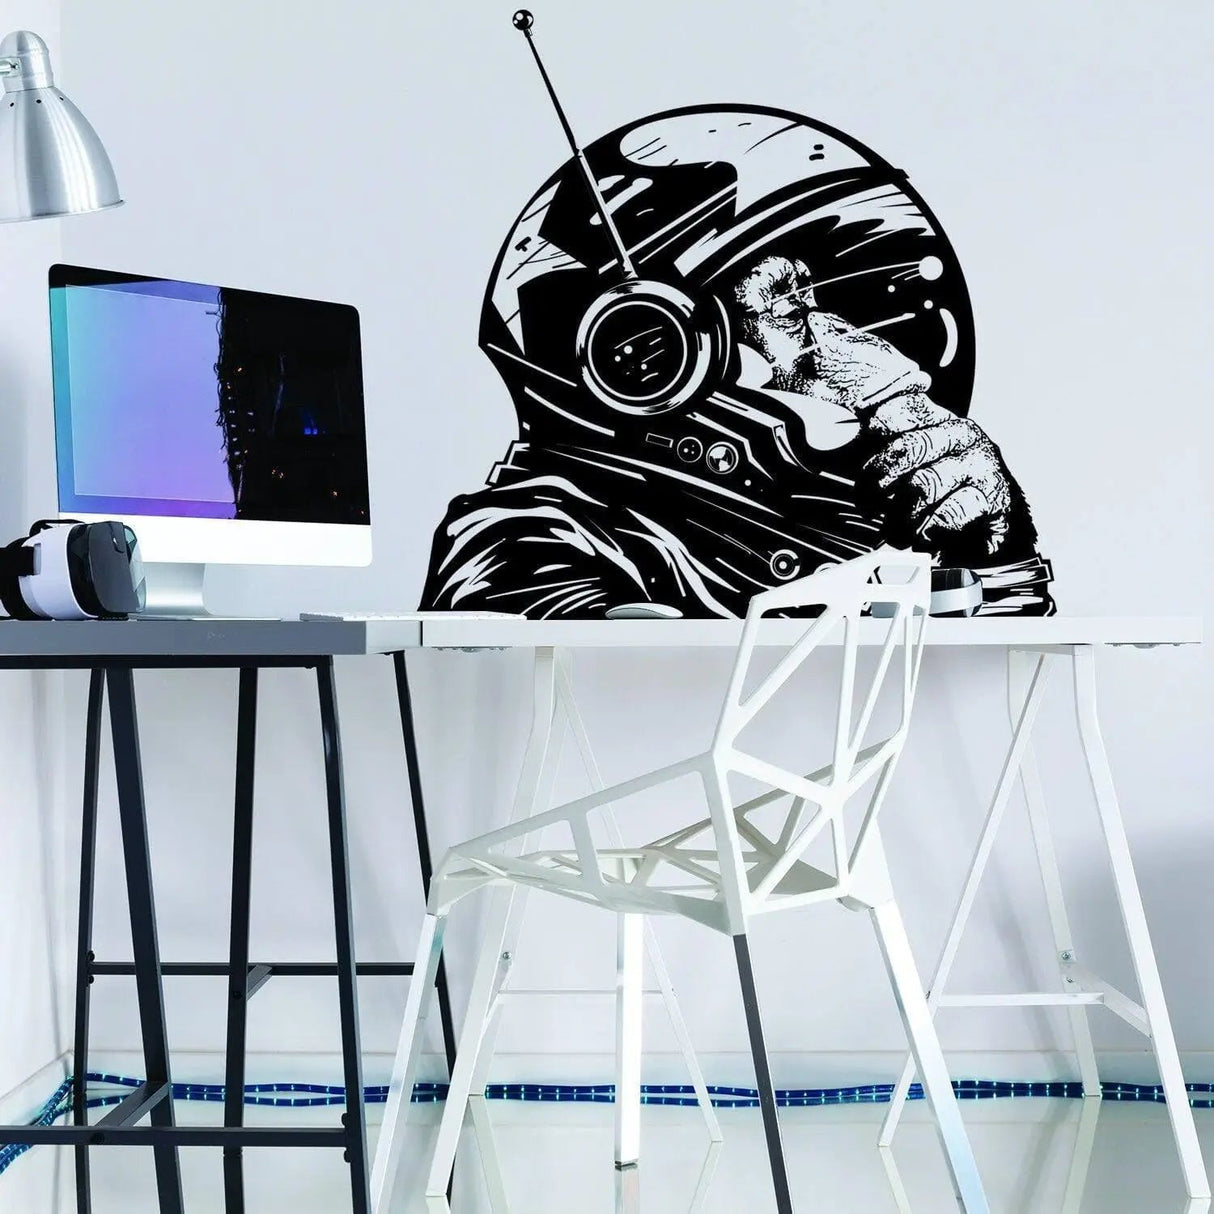 Thinking Astronaut Monkey Print Art Wall Sticker - The Thinker Chimp Space Astronauts Mural Decal - Astro Chimpanzee Spacemonkey With Helmet - Decords